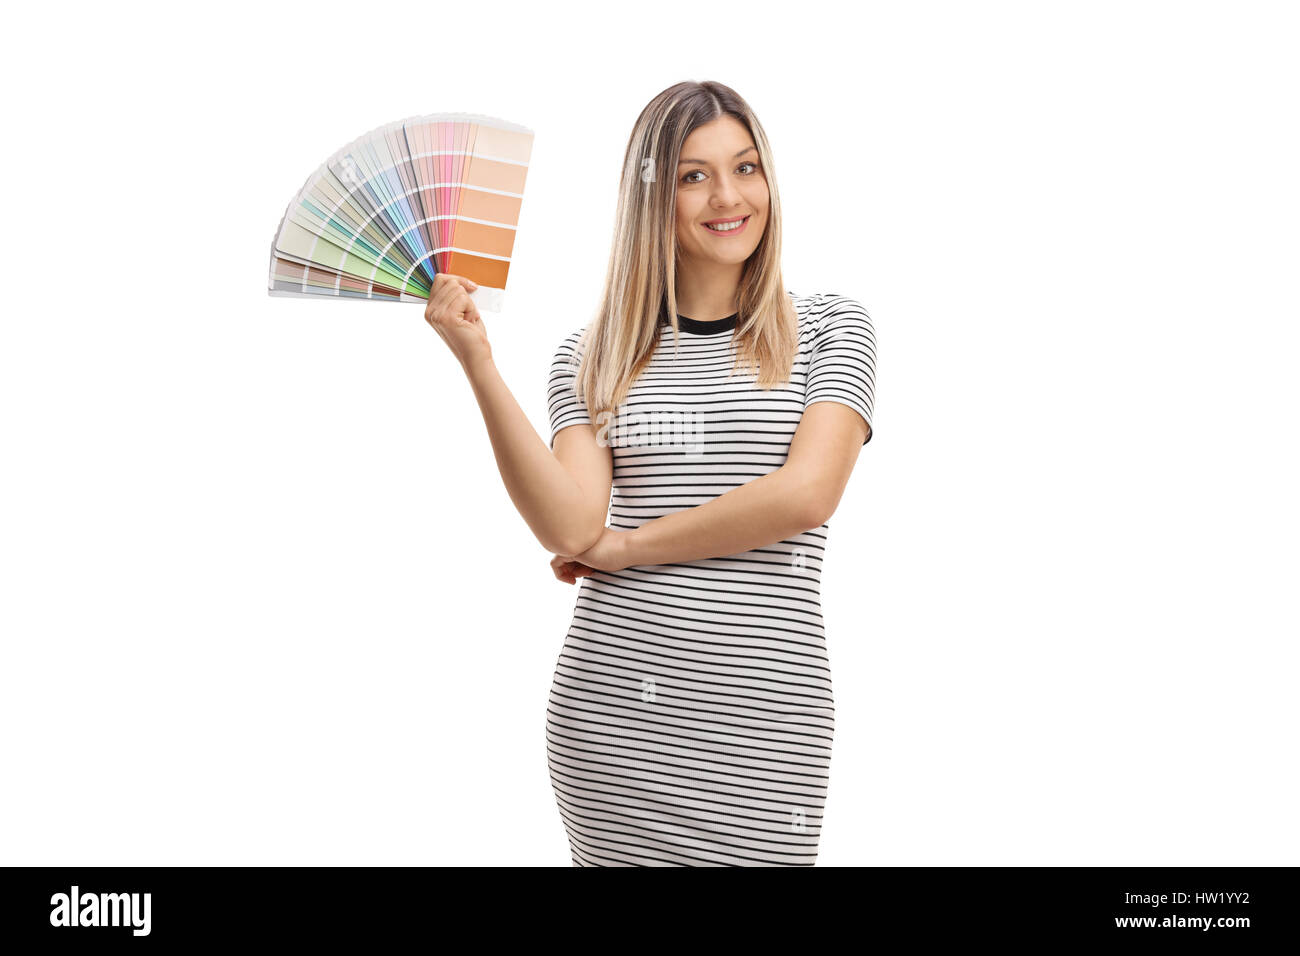 Pretty girl holding a color swatch and smiling isolated on white background Stock Photo